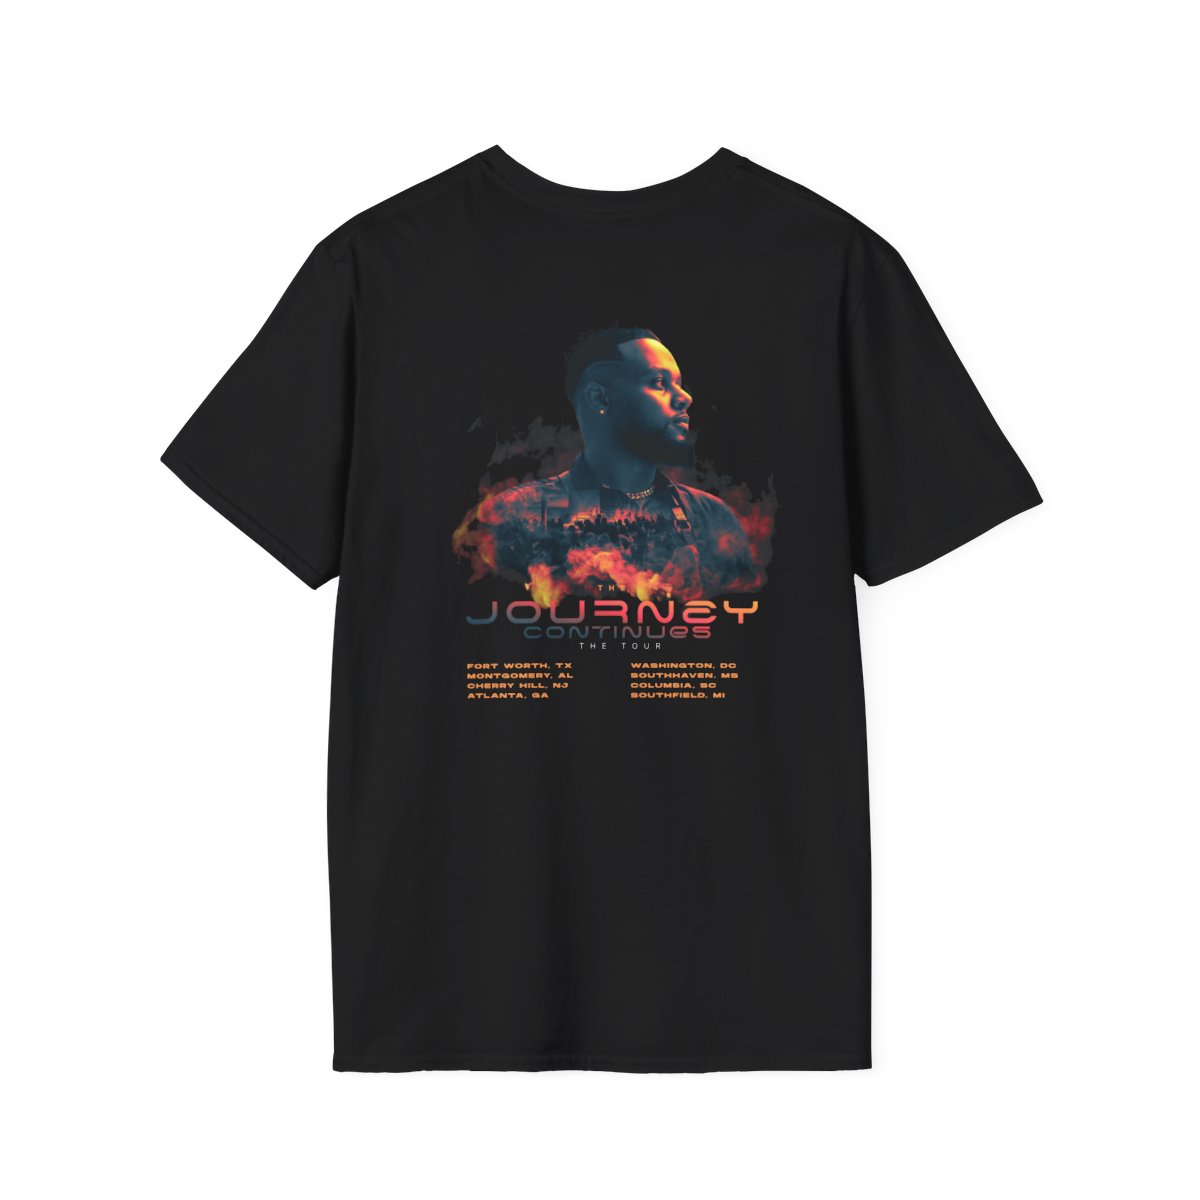 The Journey Continues Tour T-Shirt product thumbnail image